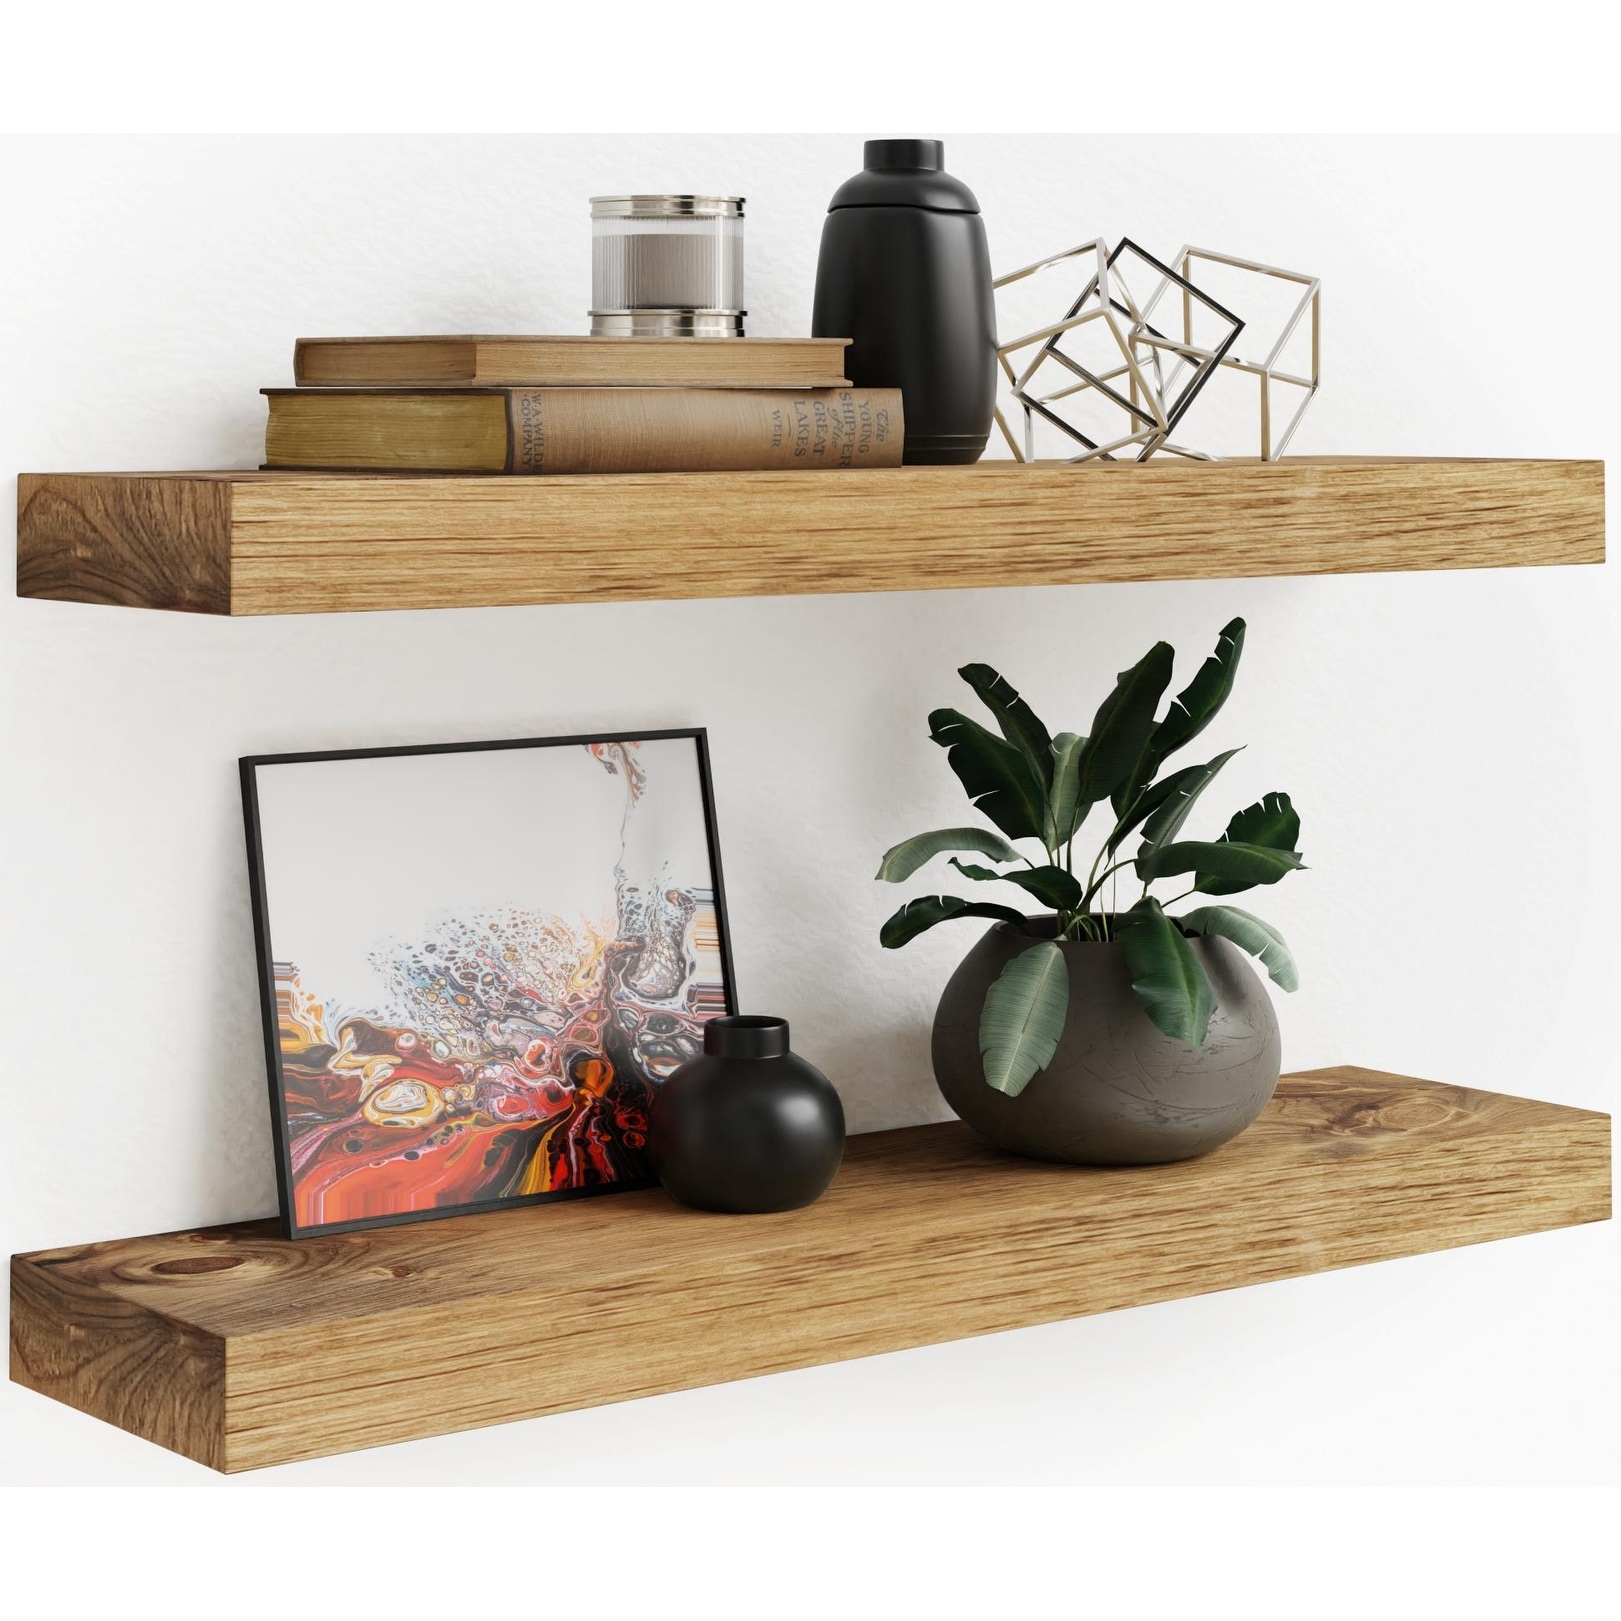 UniForU Wood Floating Shelves 4 in 1 Mounted (L 16 x W 6 inches) Storage Shelves for Kitchen, Bathroom, Bedroom, Living Room. Set of 2 with 5